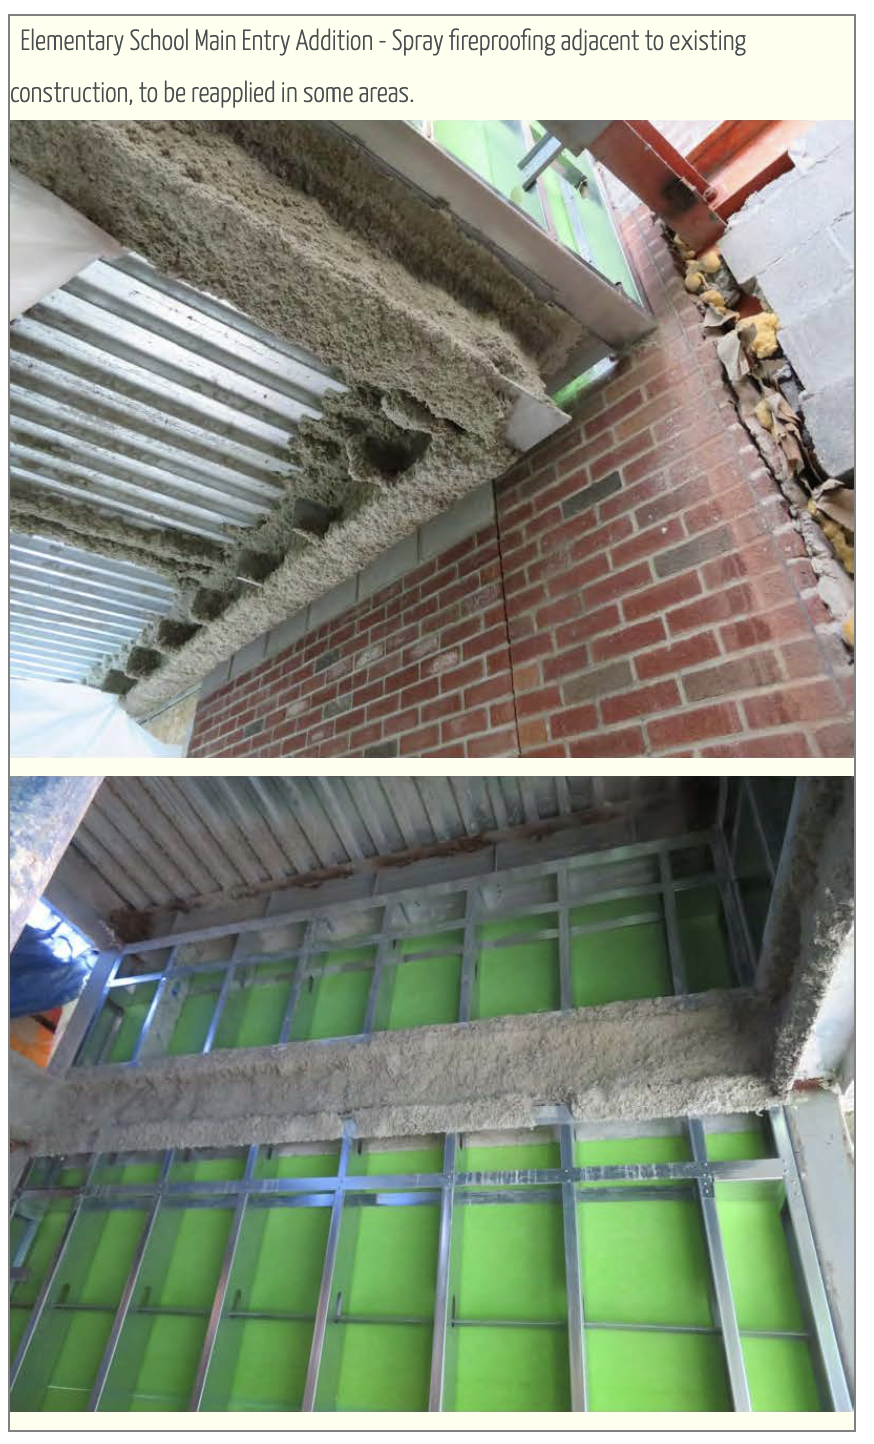 Elementary school math entry addition - spray fireproofing adjacent to existing construction to be reapplied in some areas. 